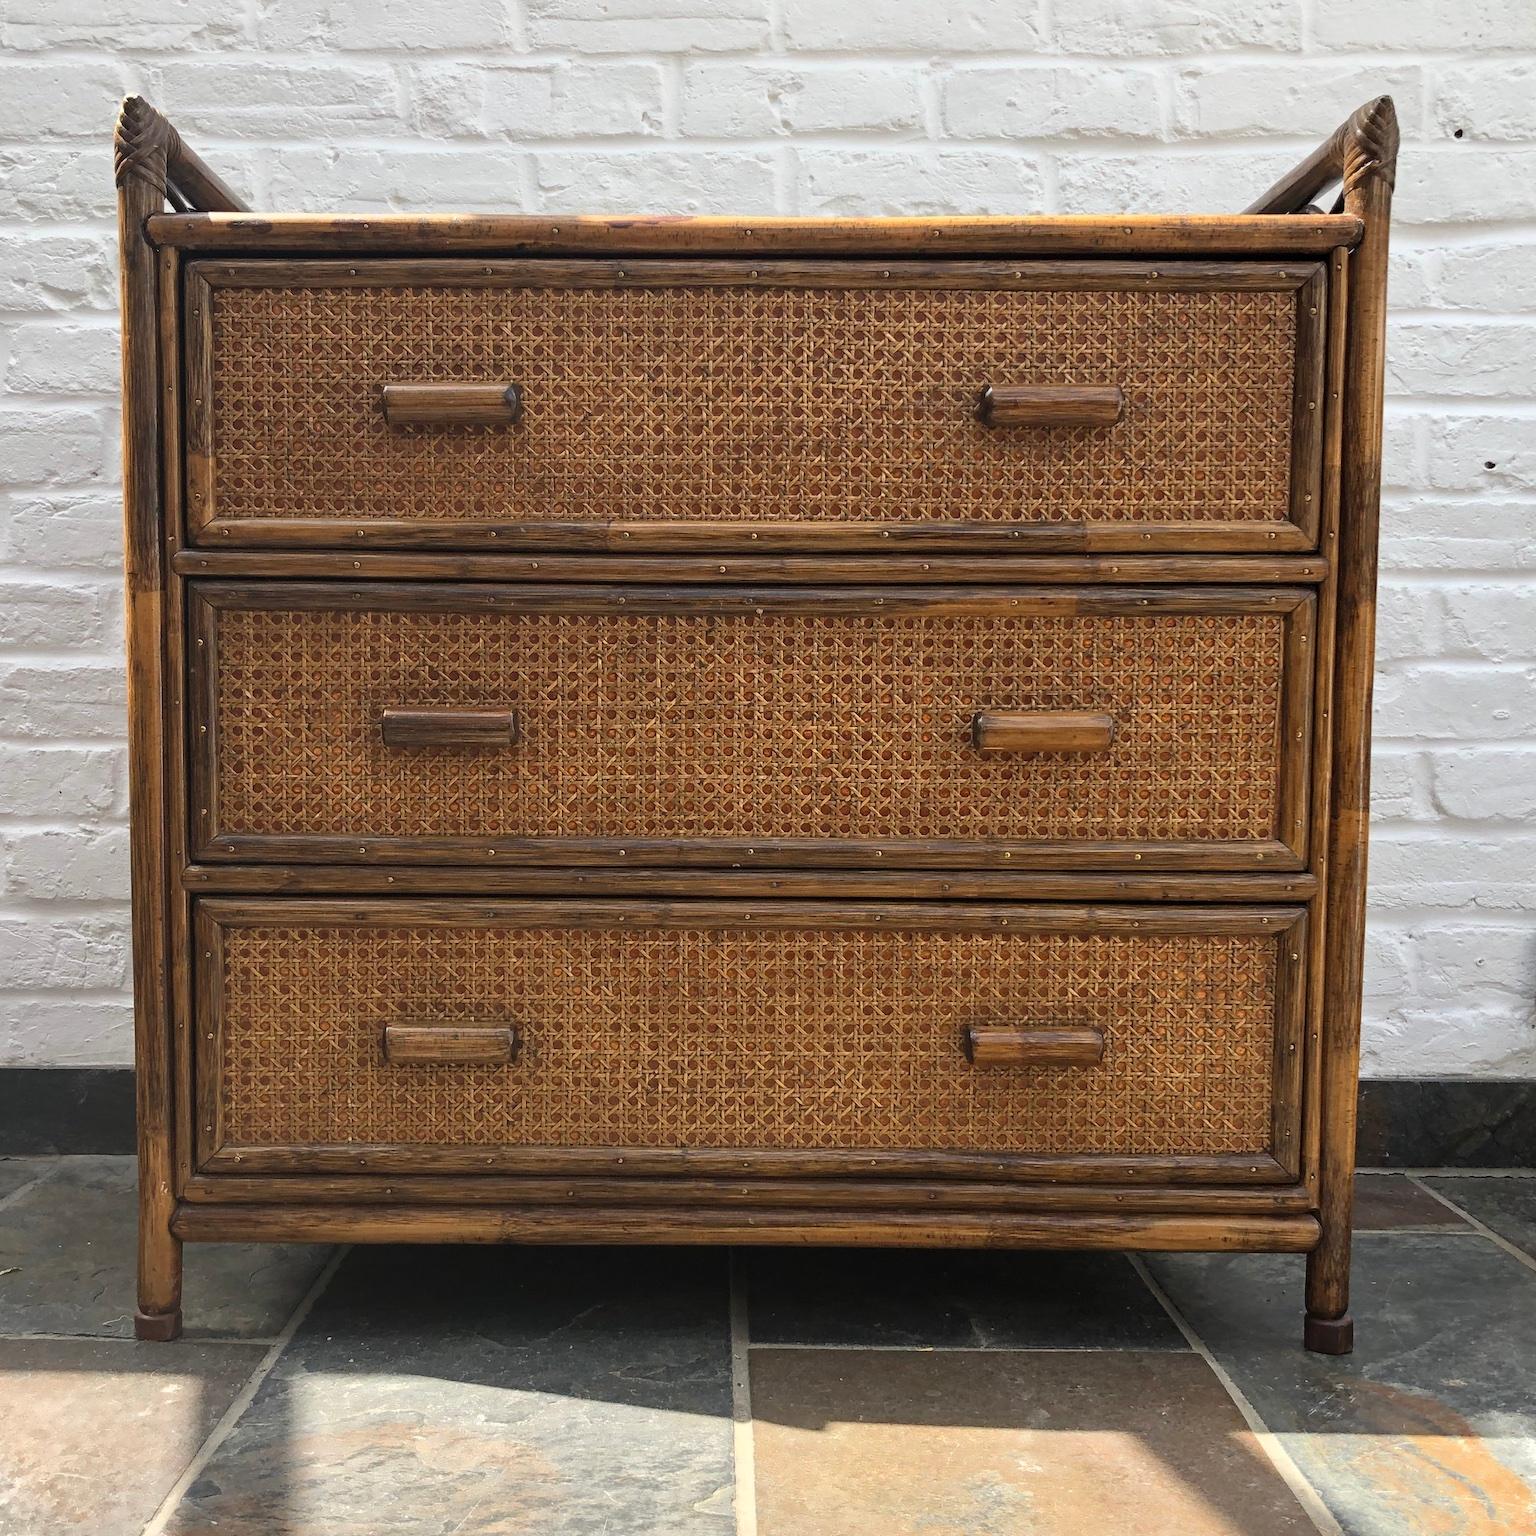 British Midcentury Rattan / Cane Chest of Drawers by Angraves, England, 1970s